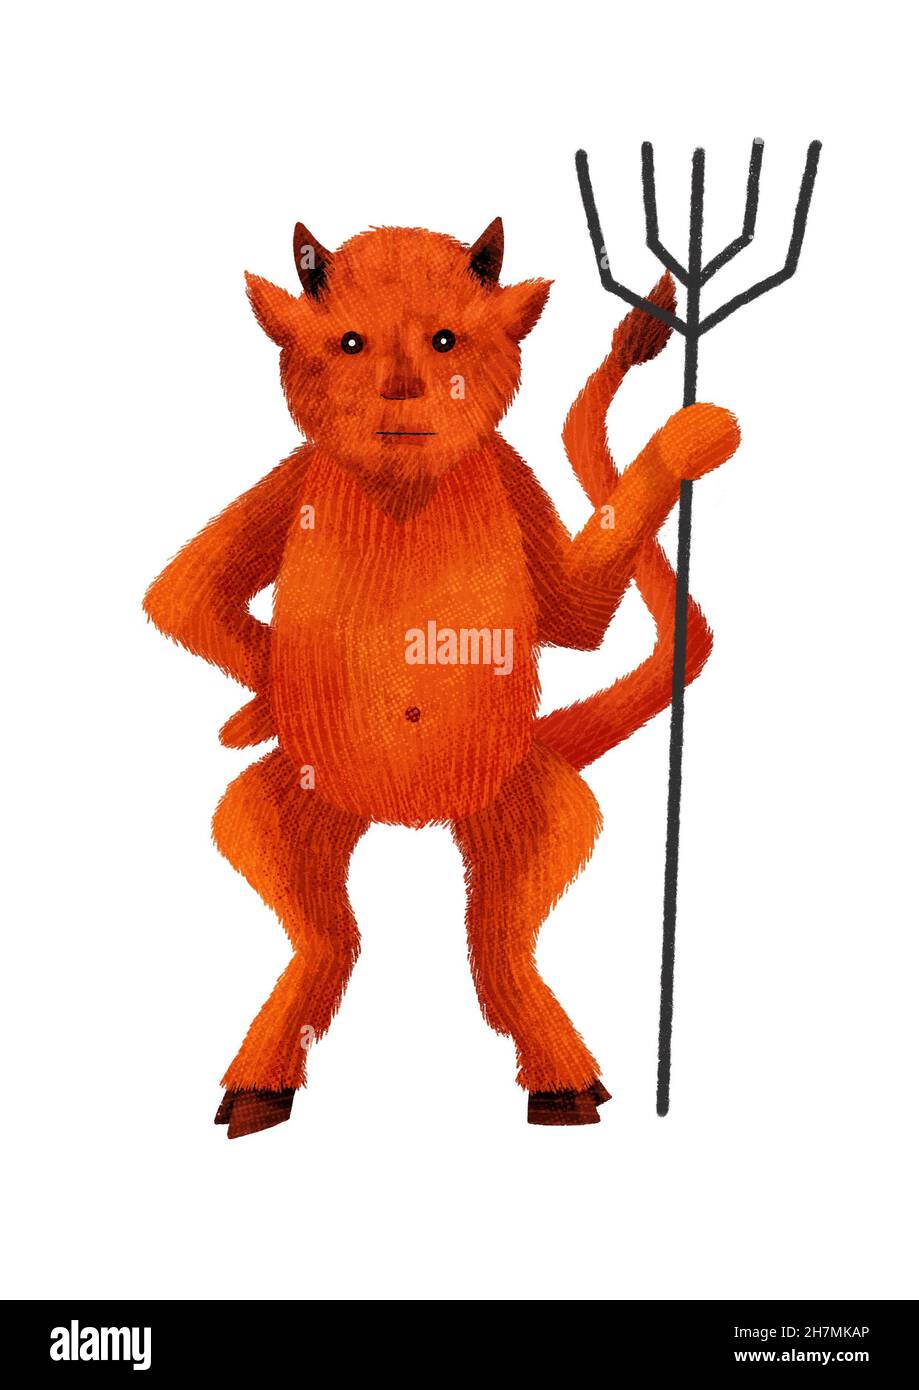 Devil. Character important for christian tradition, for holidays als Christmas or St. Nikolas day. Stock Photo